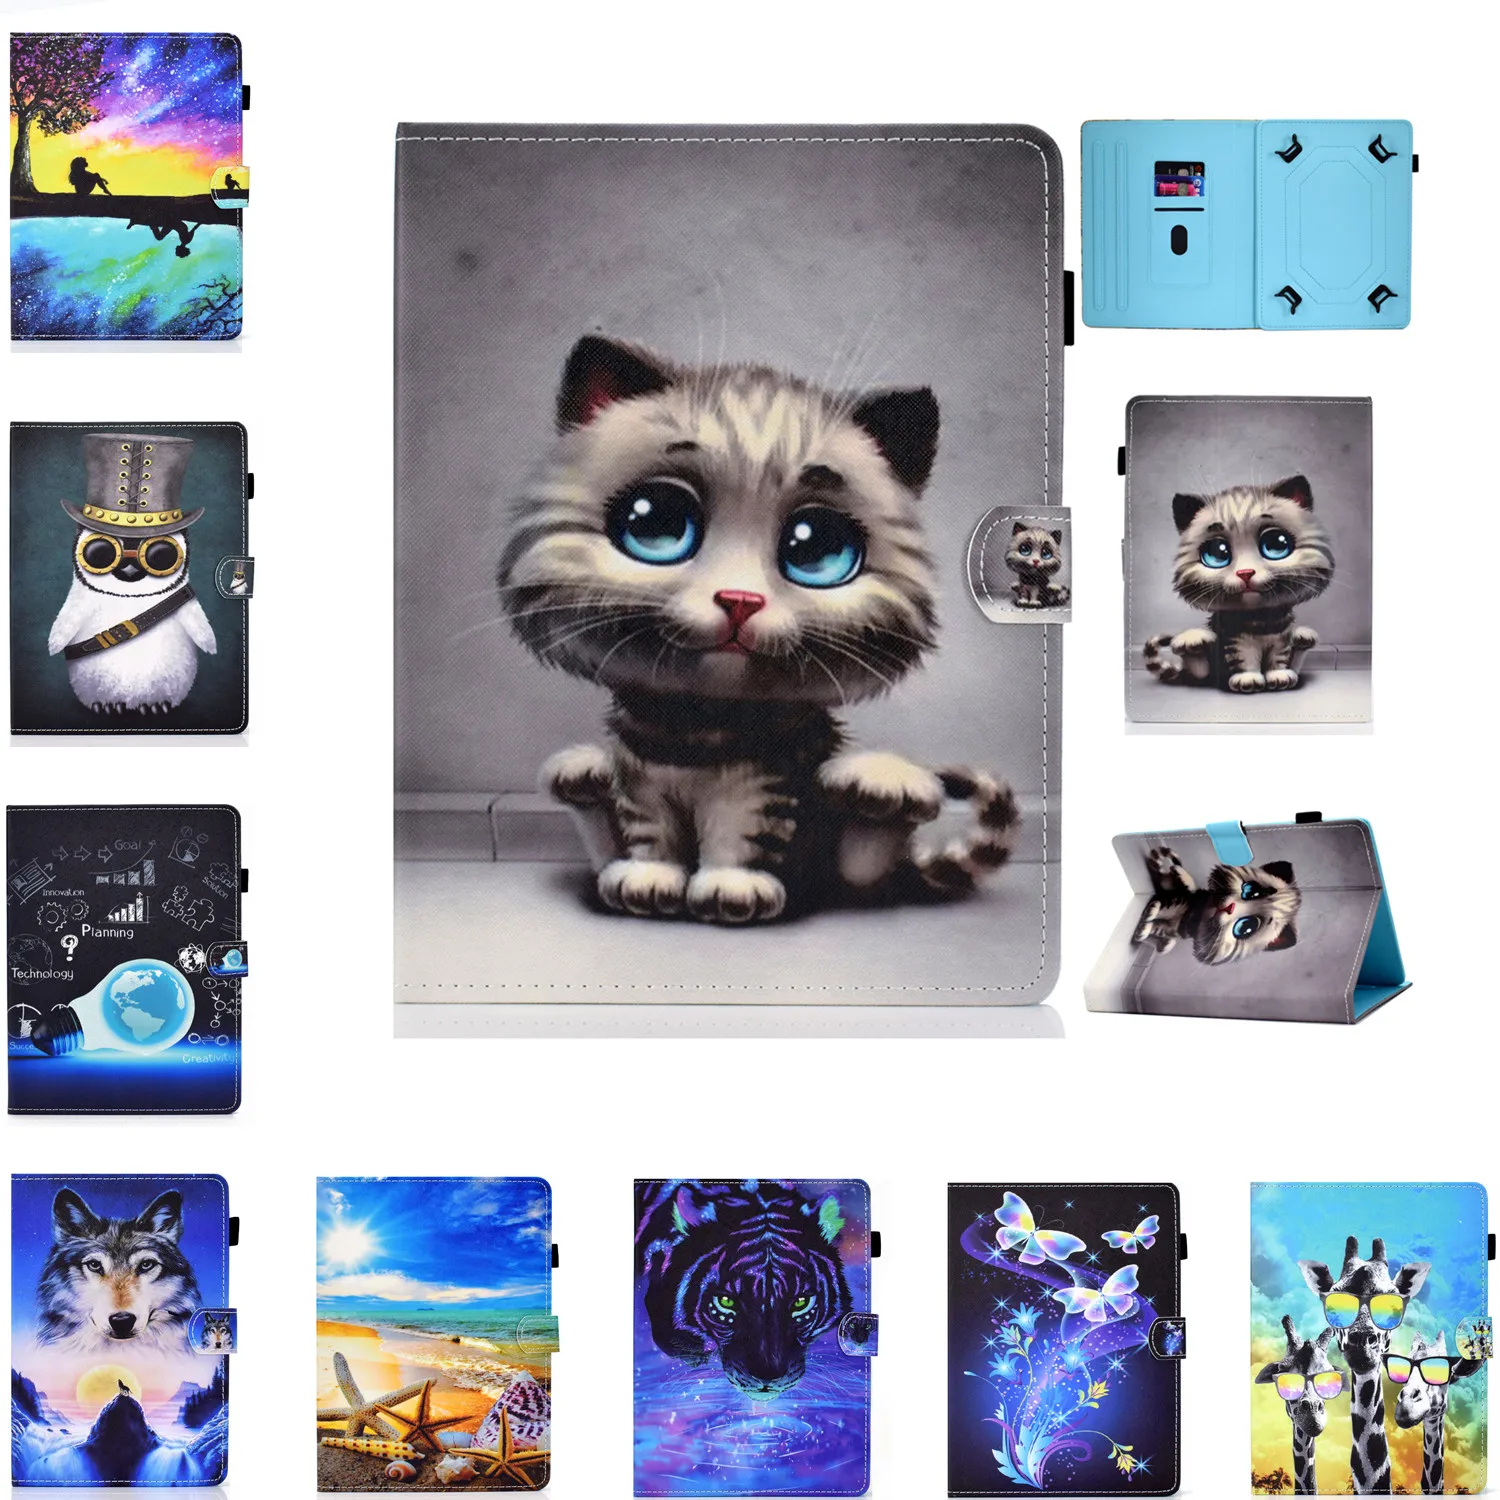 

Cute Cover for Digma CITI 8592 8589 8588 8527 8542/Plane 8550S 8555M 8558/Optima 8027 8019N 3G 4G 8 Inch Tablet Universal Case